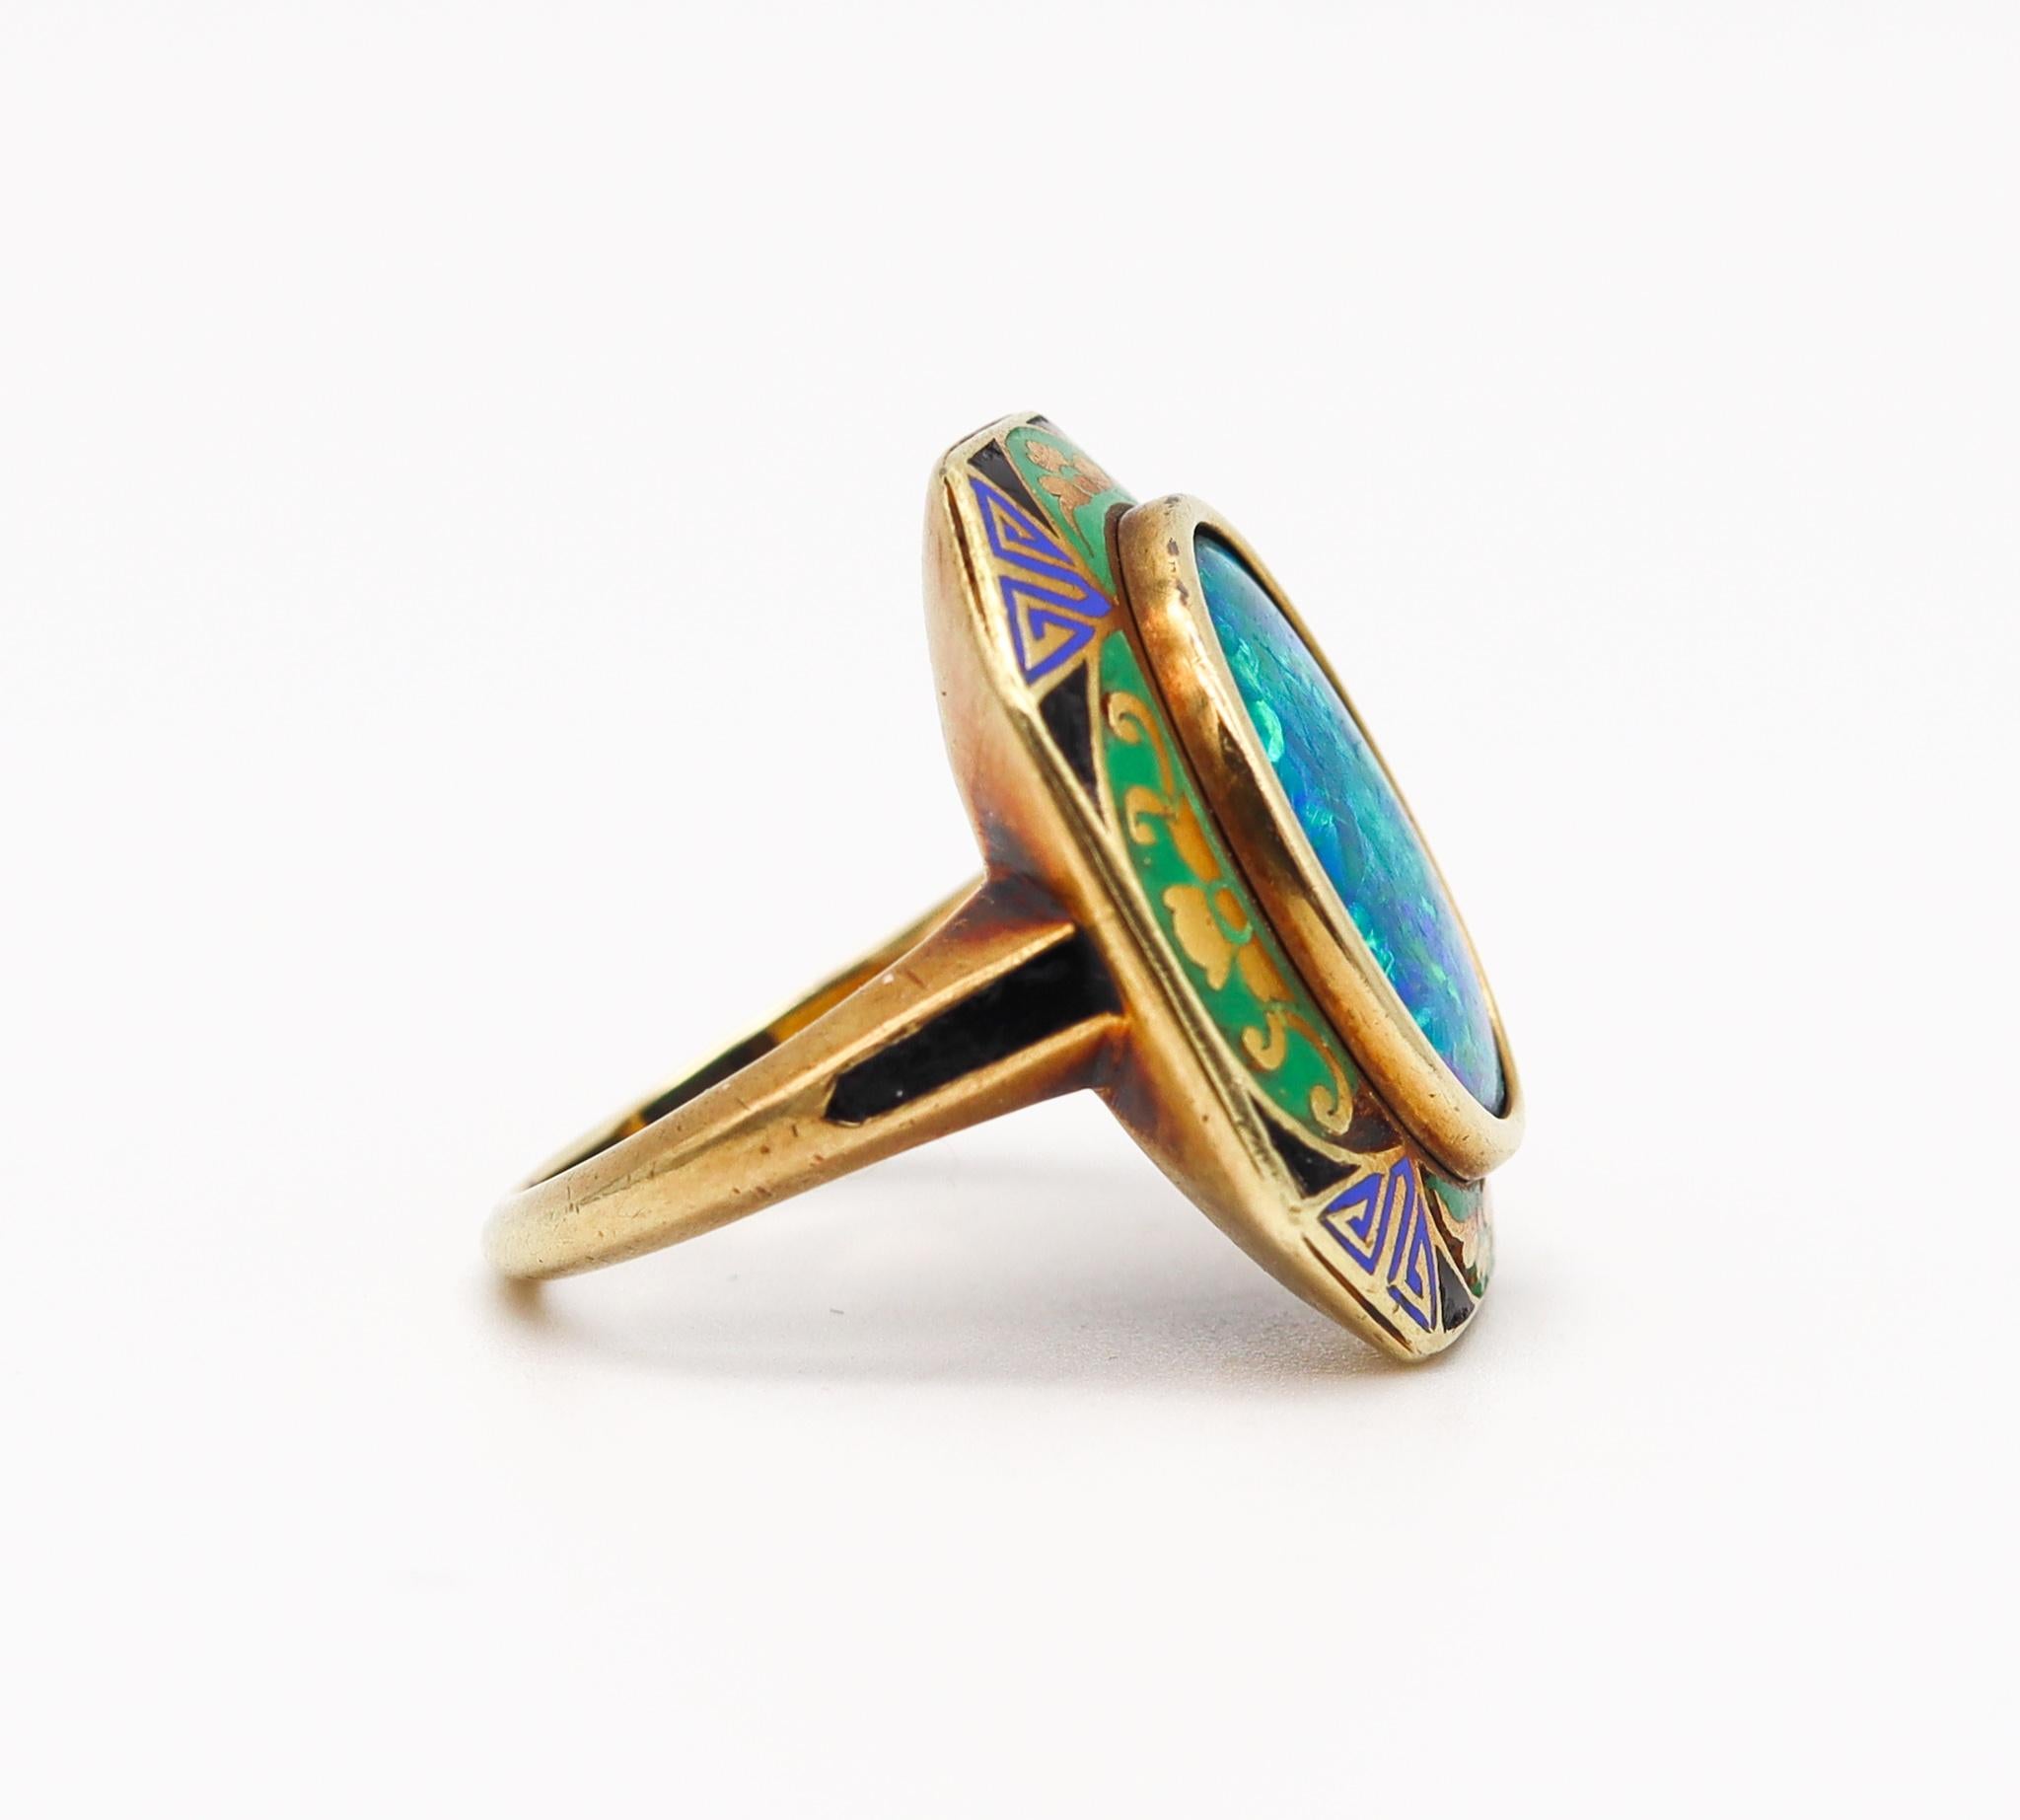 Cabochon Art Deco 1925 Geometric Enamelled Ring in 18kt Gold with Rare 3.78 Ct Black Opal